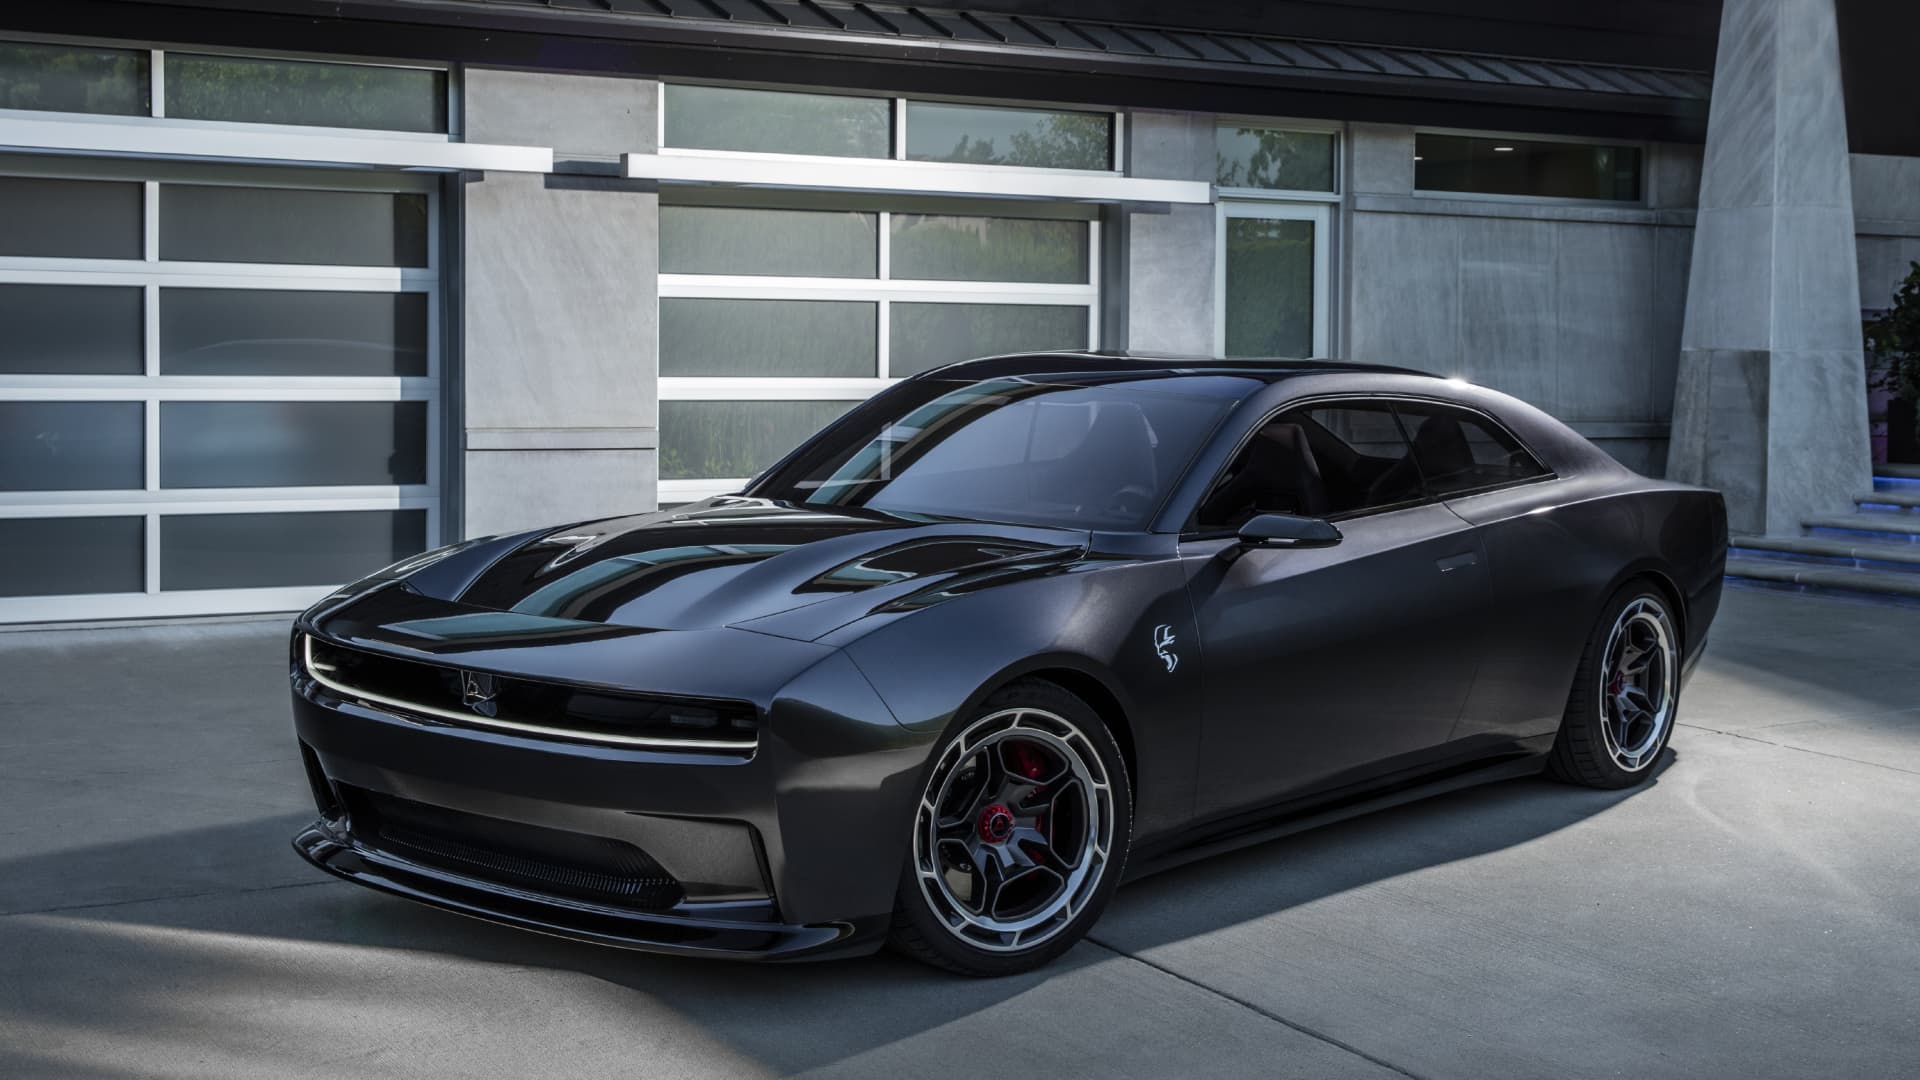 Dodge unveils new electric muscle car concept that could replace the Challenger and Charger – CNBC